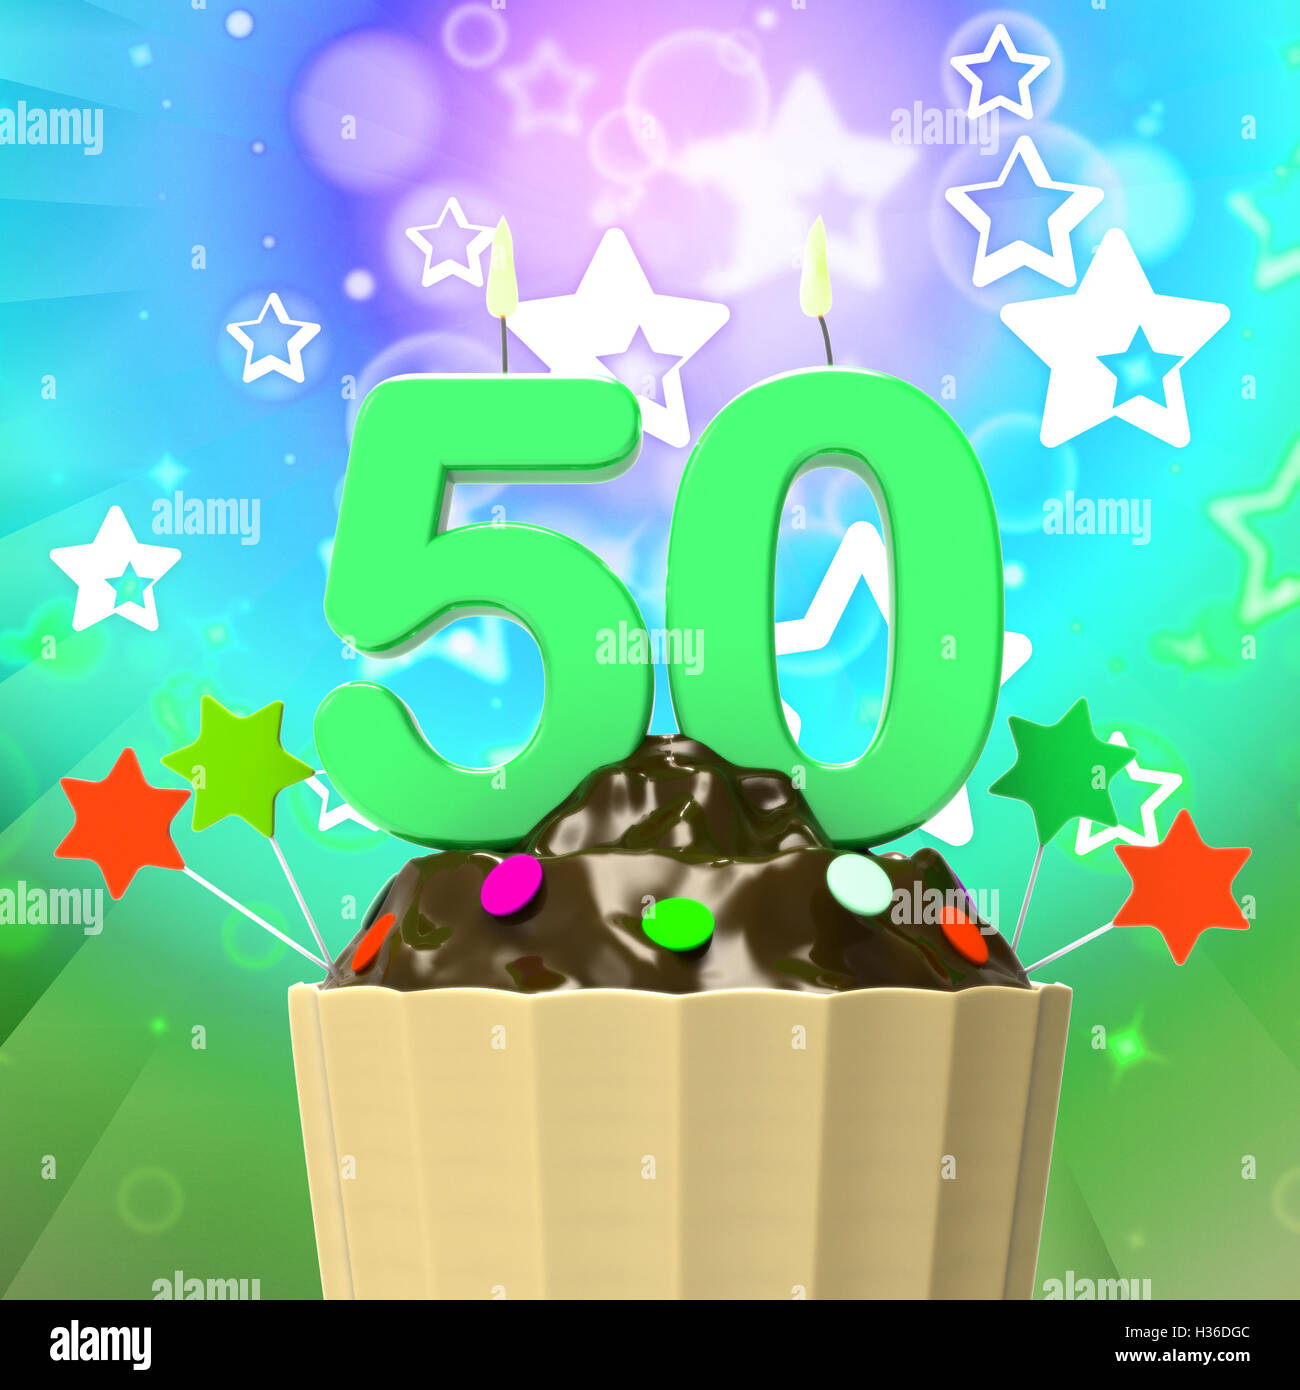 Fifty Candle On Cupcake Means Special Celebration Or Colourful E Stock Photo